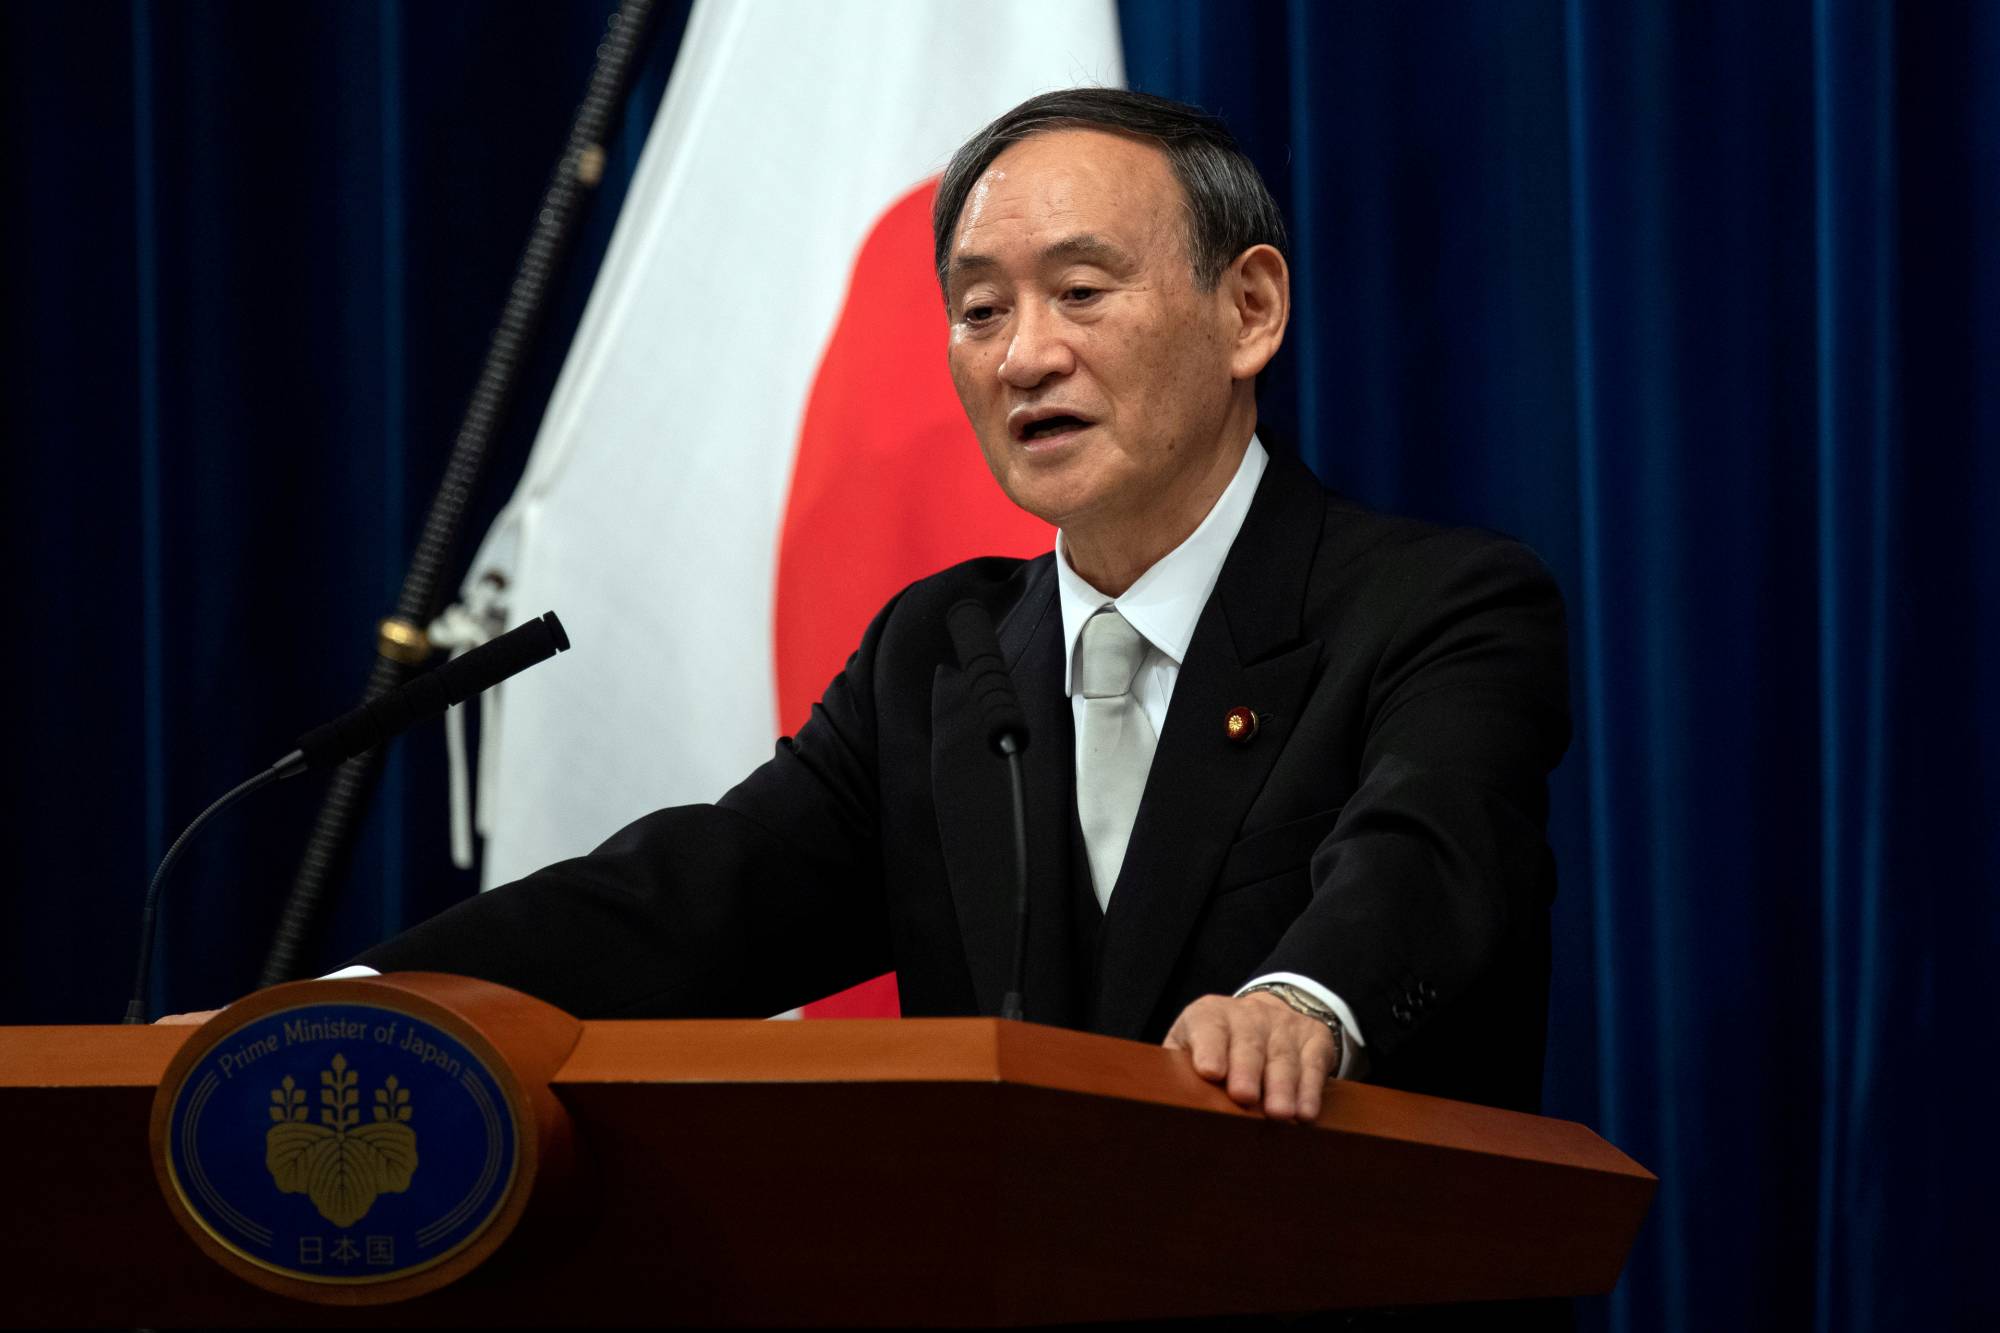 Yoshihide Suga speaks during a news conference in Tokyo on Sept. 16. following his confirmation as Prime Minister in Tokyo. Suga has denied that the rejection of six scholars to the Science Council of Japan is attributed to their criticism of national security legislation approved under then-Prime Minister Shinzo Abe. | POOL / VIA REUTERS